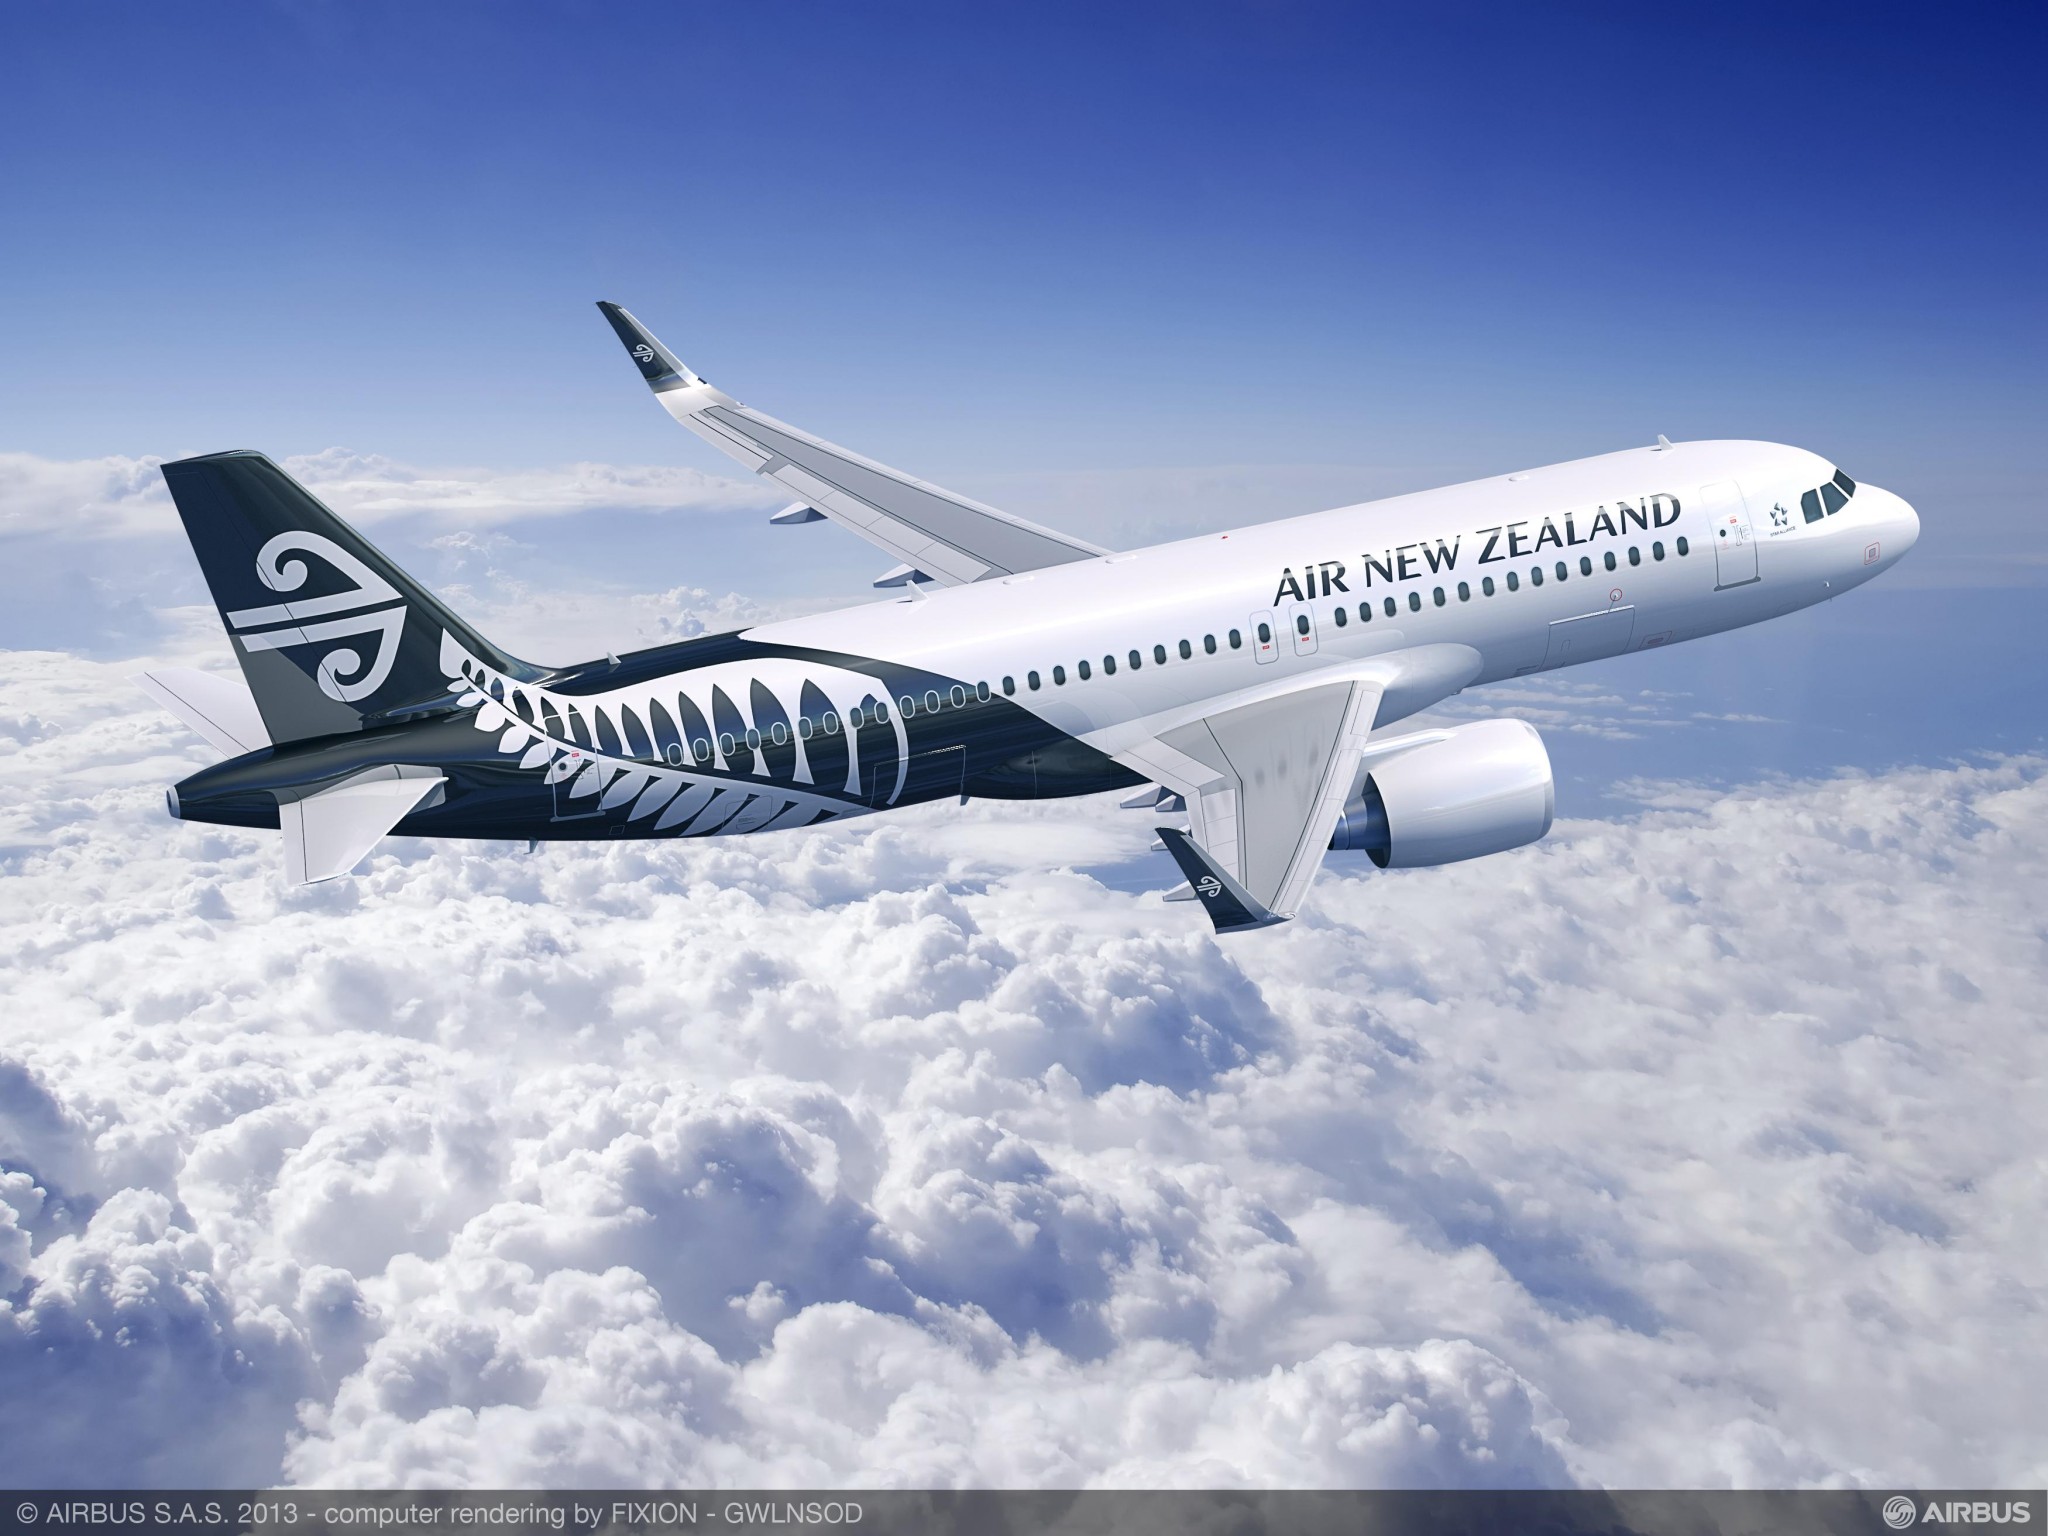 Air New Zealand predicts $3 billion hit to revenues from Covid 19